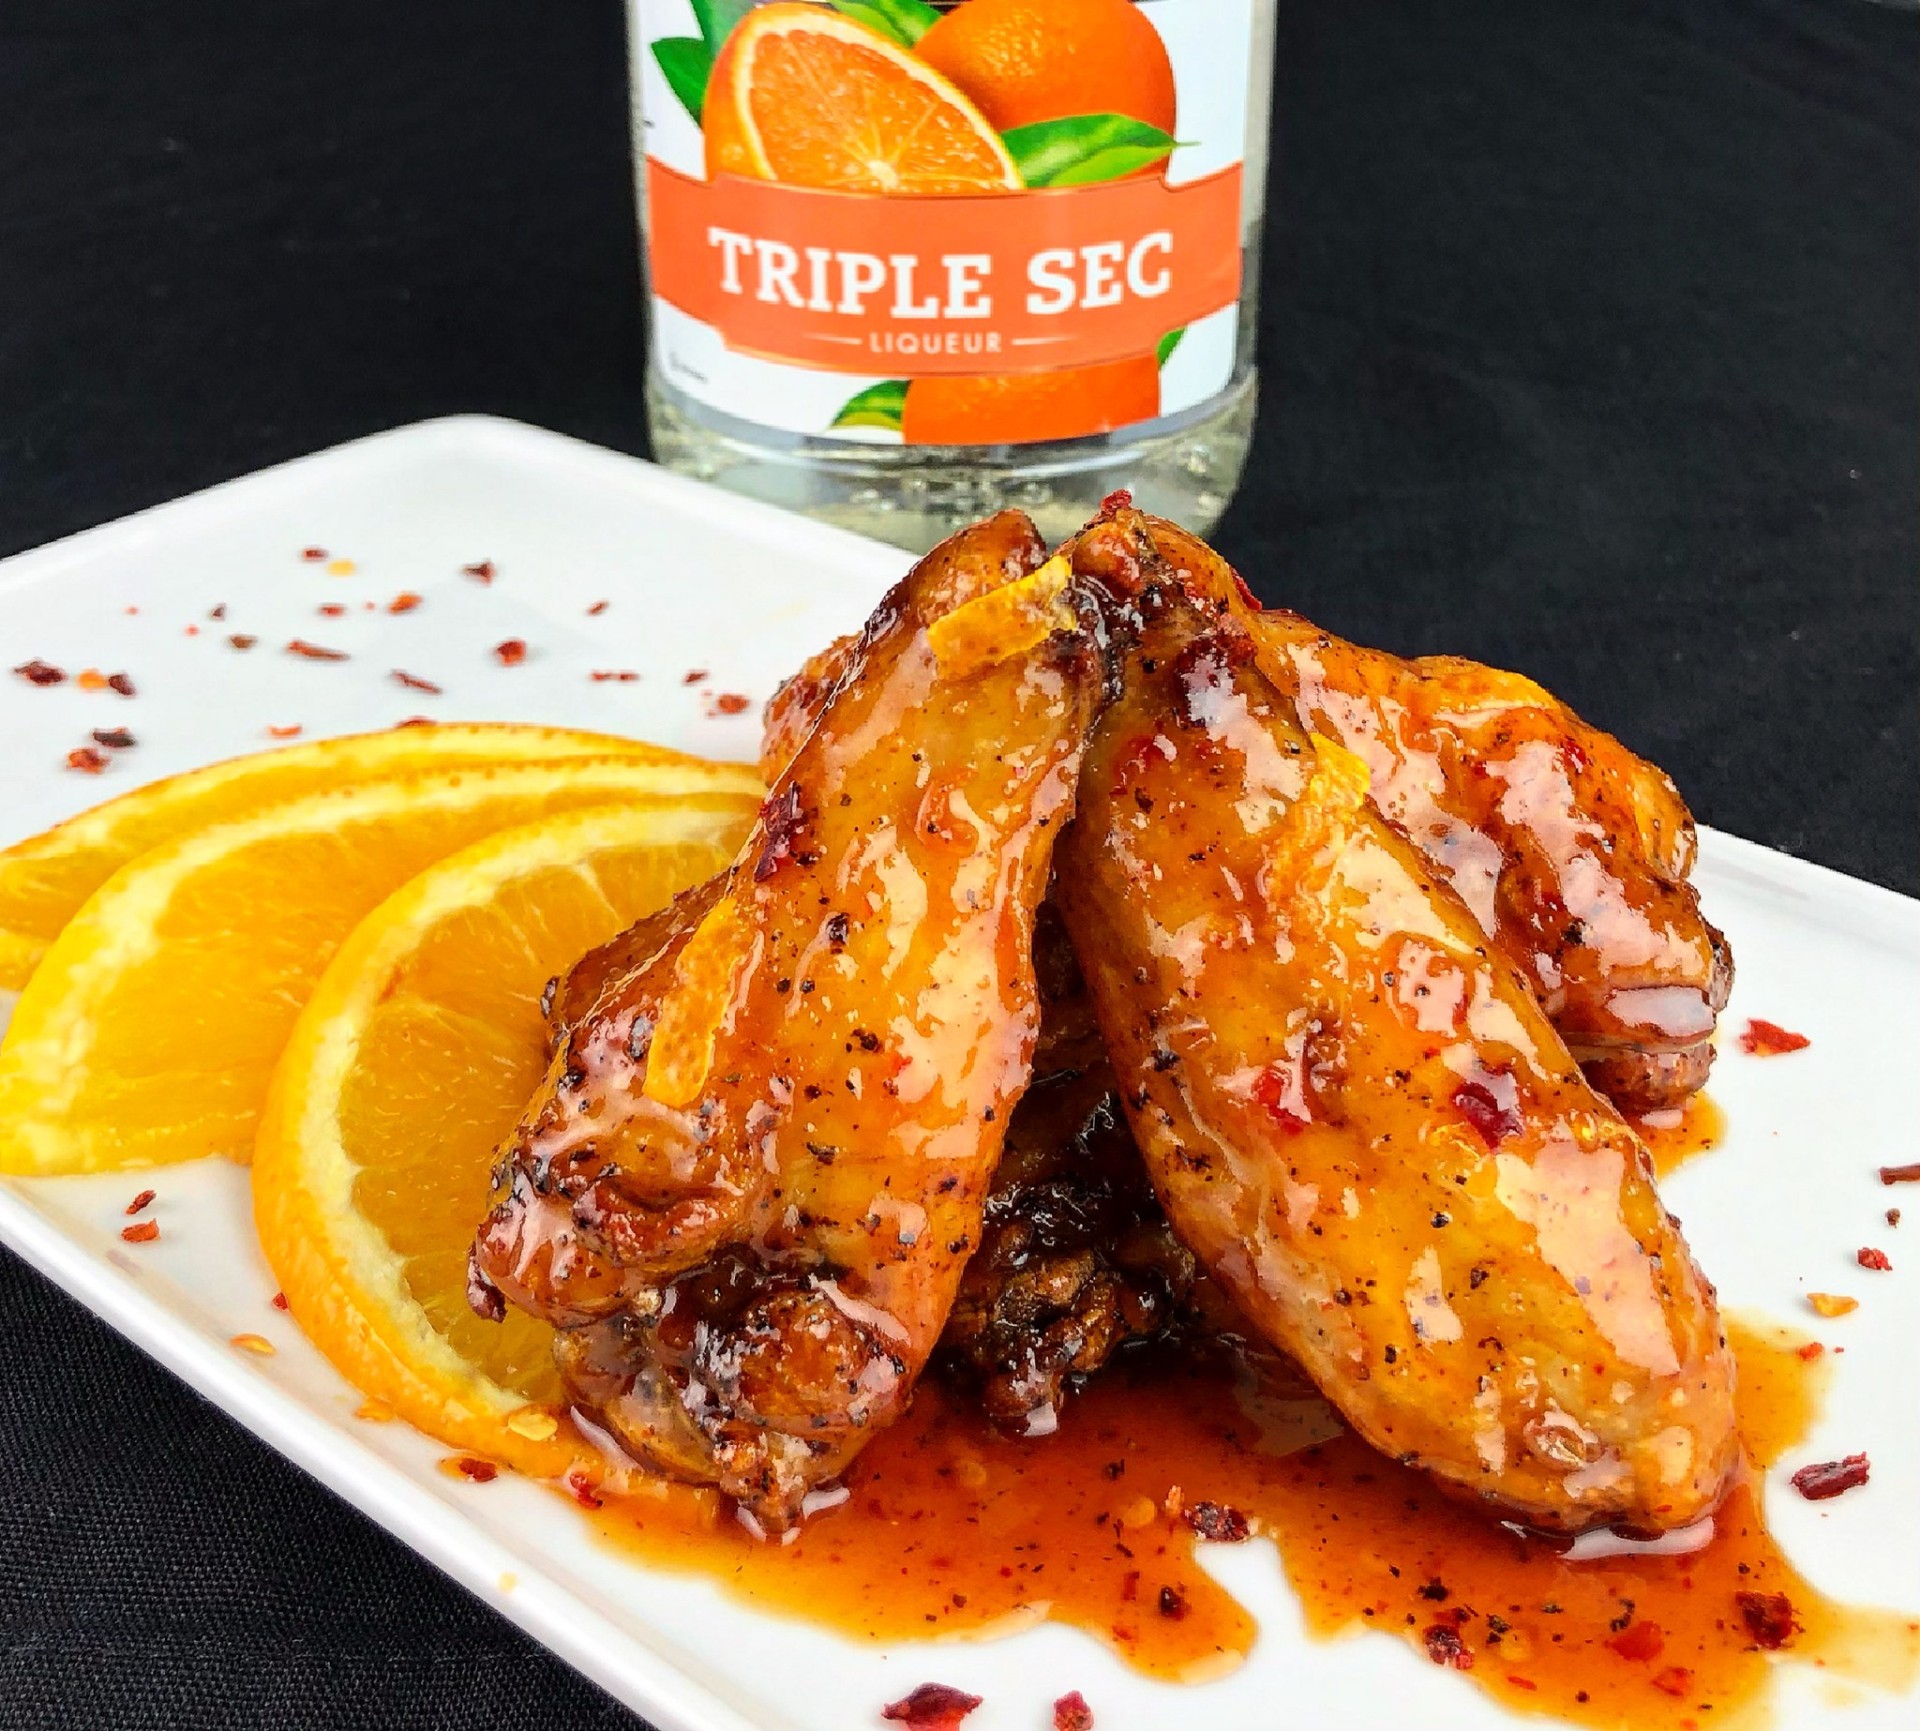 Get ready for orange soda hot wings: Alcohol-infused chicken wing ghost  kitchen planning to open brick and mortar restaurant – 614NOW